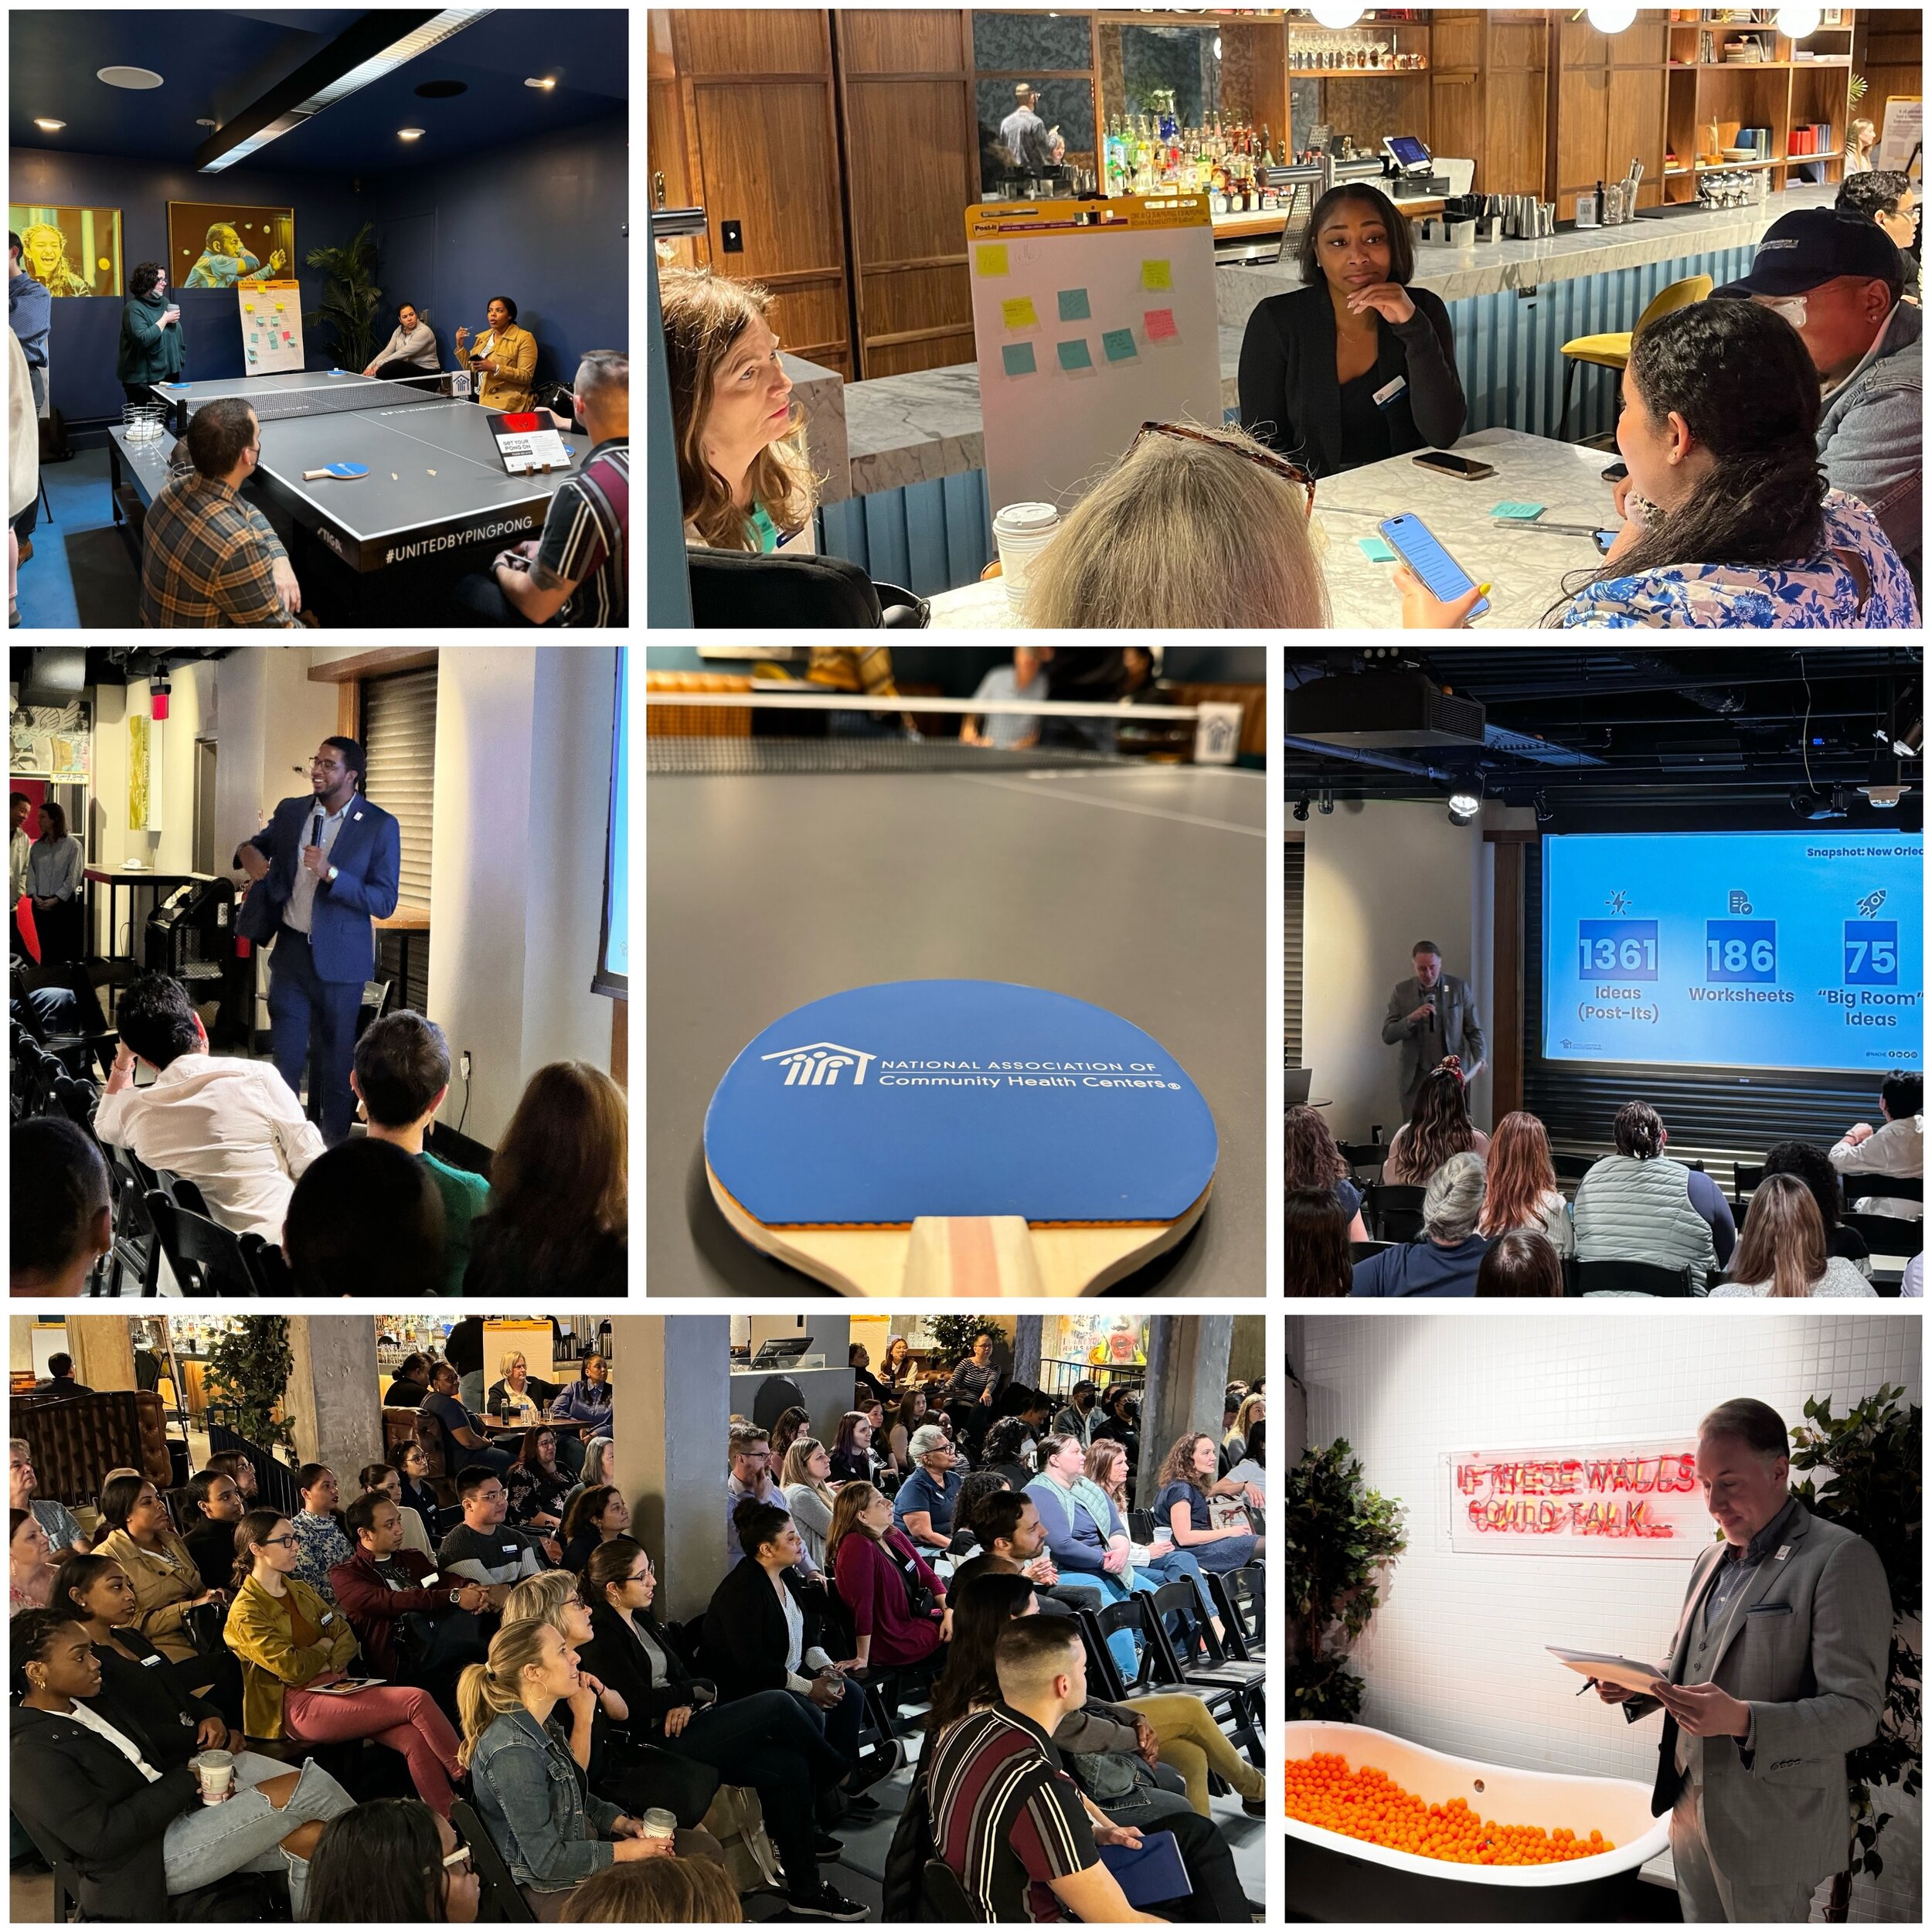 Sometimes, the most important conversations happen in the most unexpected places. Last week, #TeamLINK had the honor of collaborating with the full @nachc team&mdash;130 brilliant leaders, each with really big ideas about how to enthusiastically adva